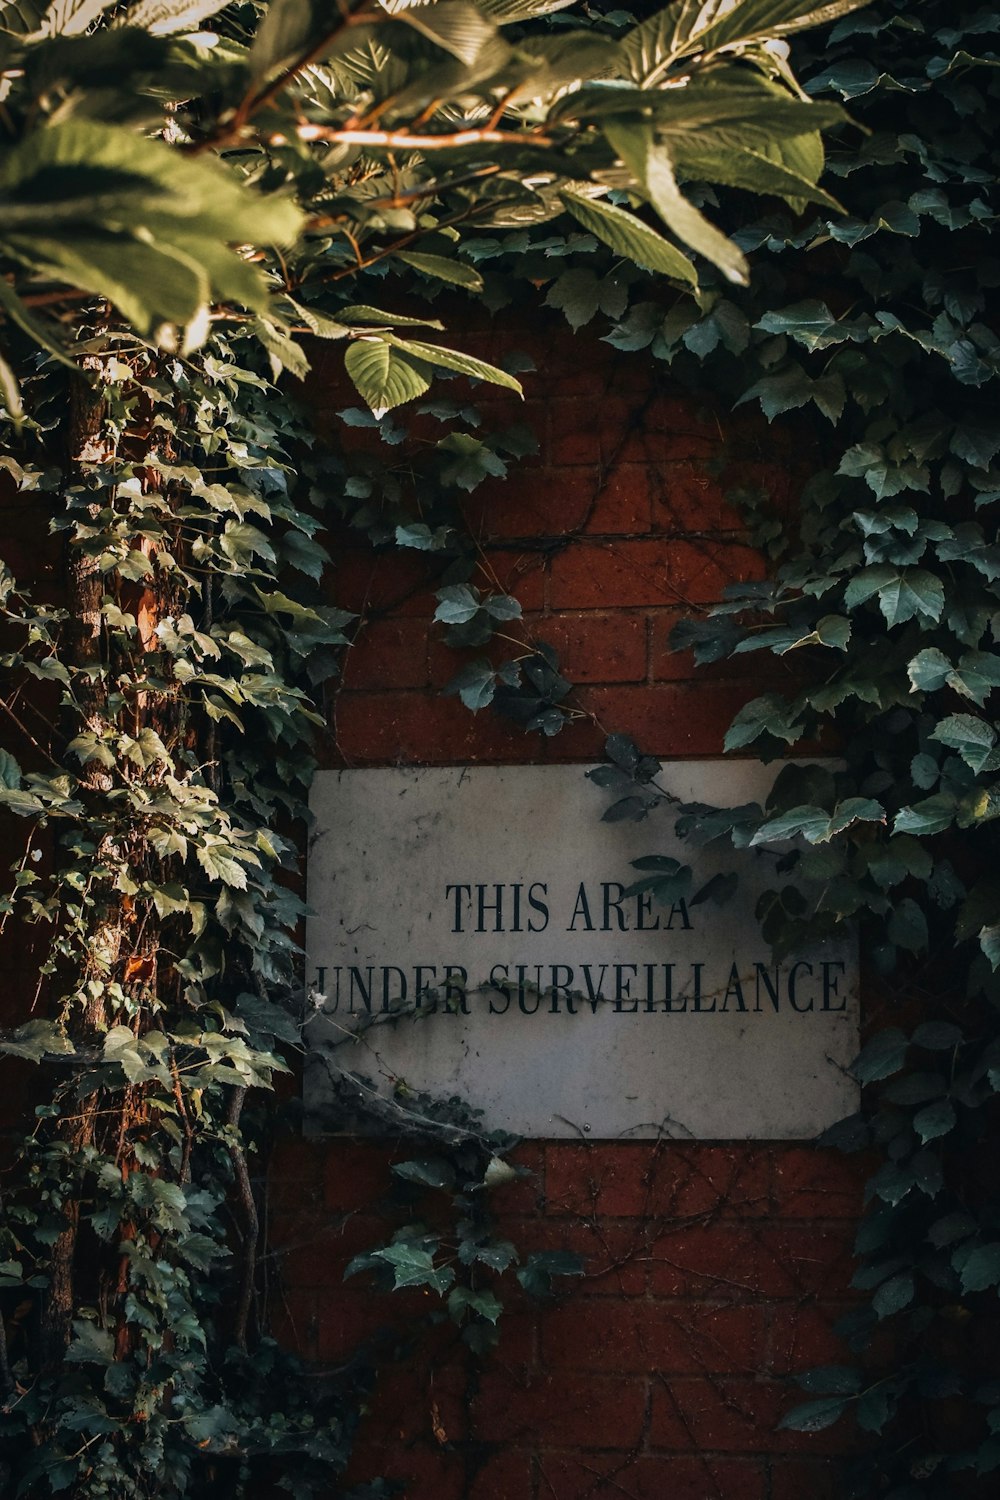 a sign on a brick wall